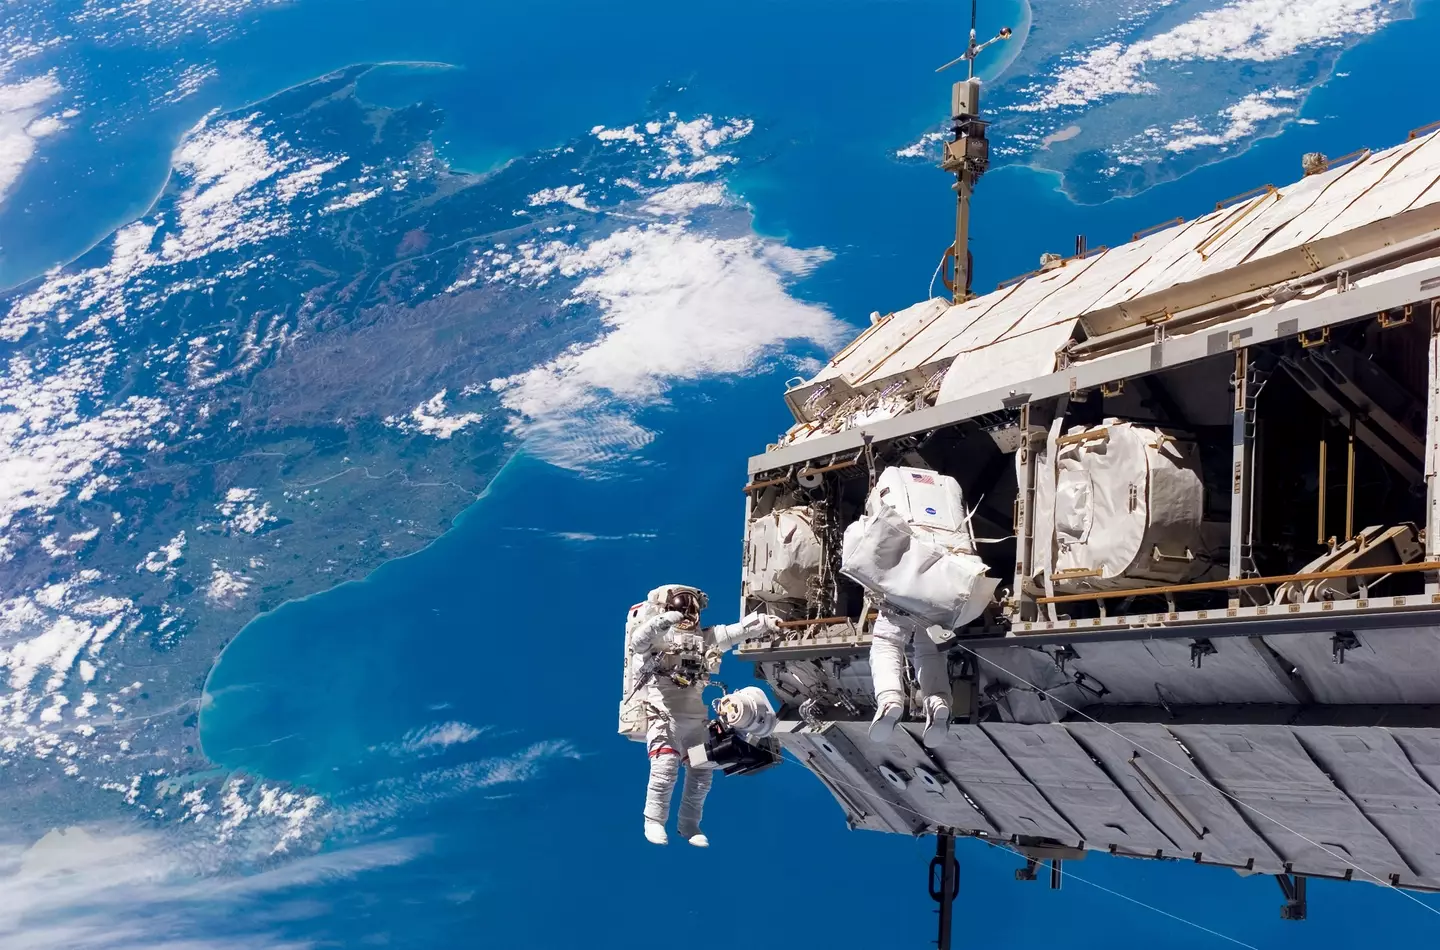 Astronauts on space walk on the ISS. (Alamy)